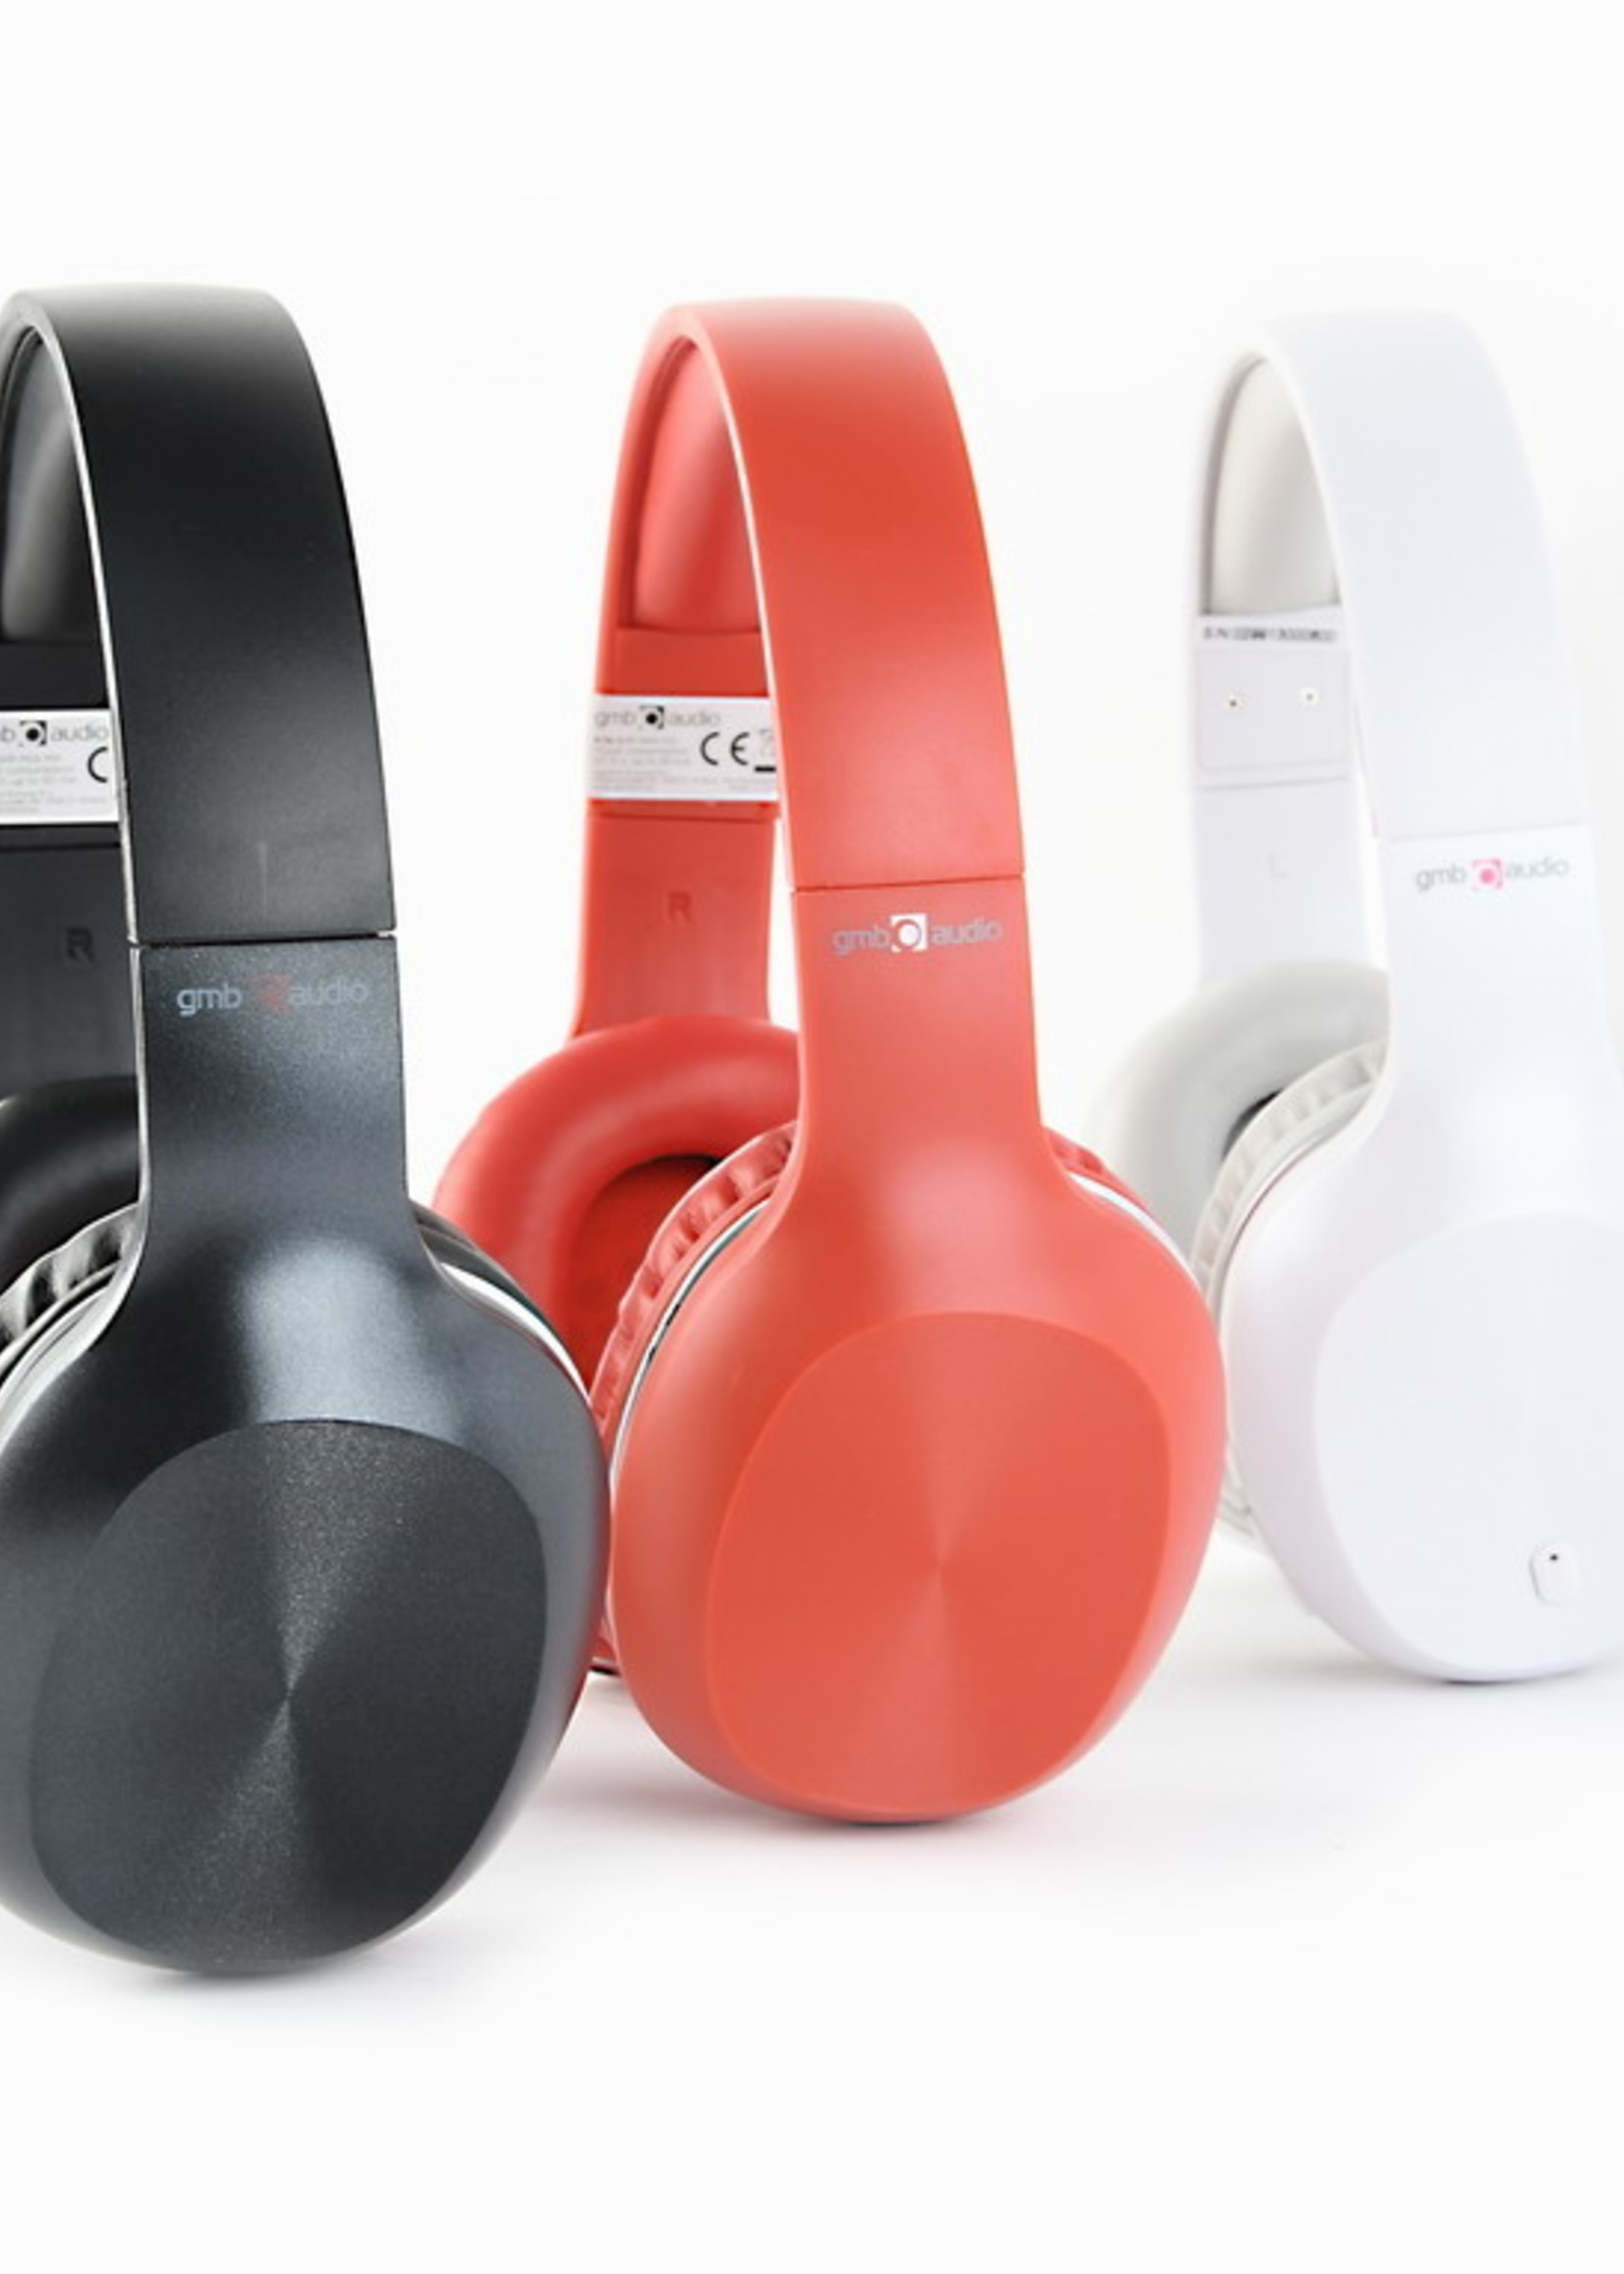 GMB-Audio Stereo Bluetooth headset, Mix Color